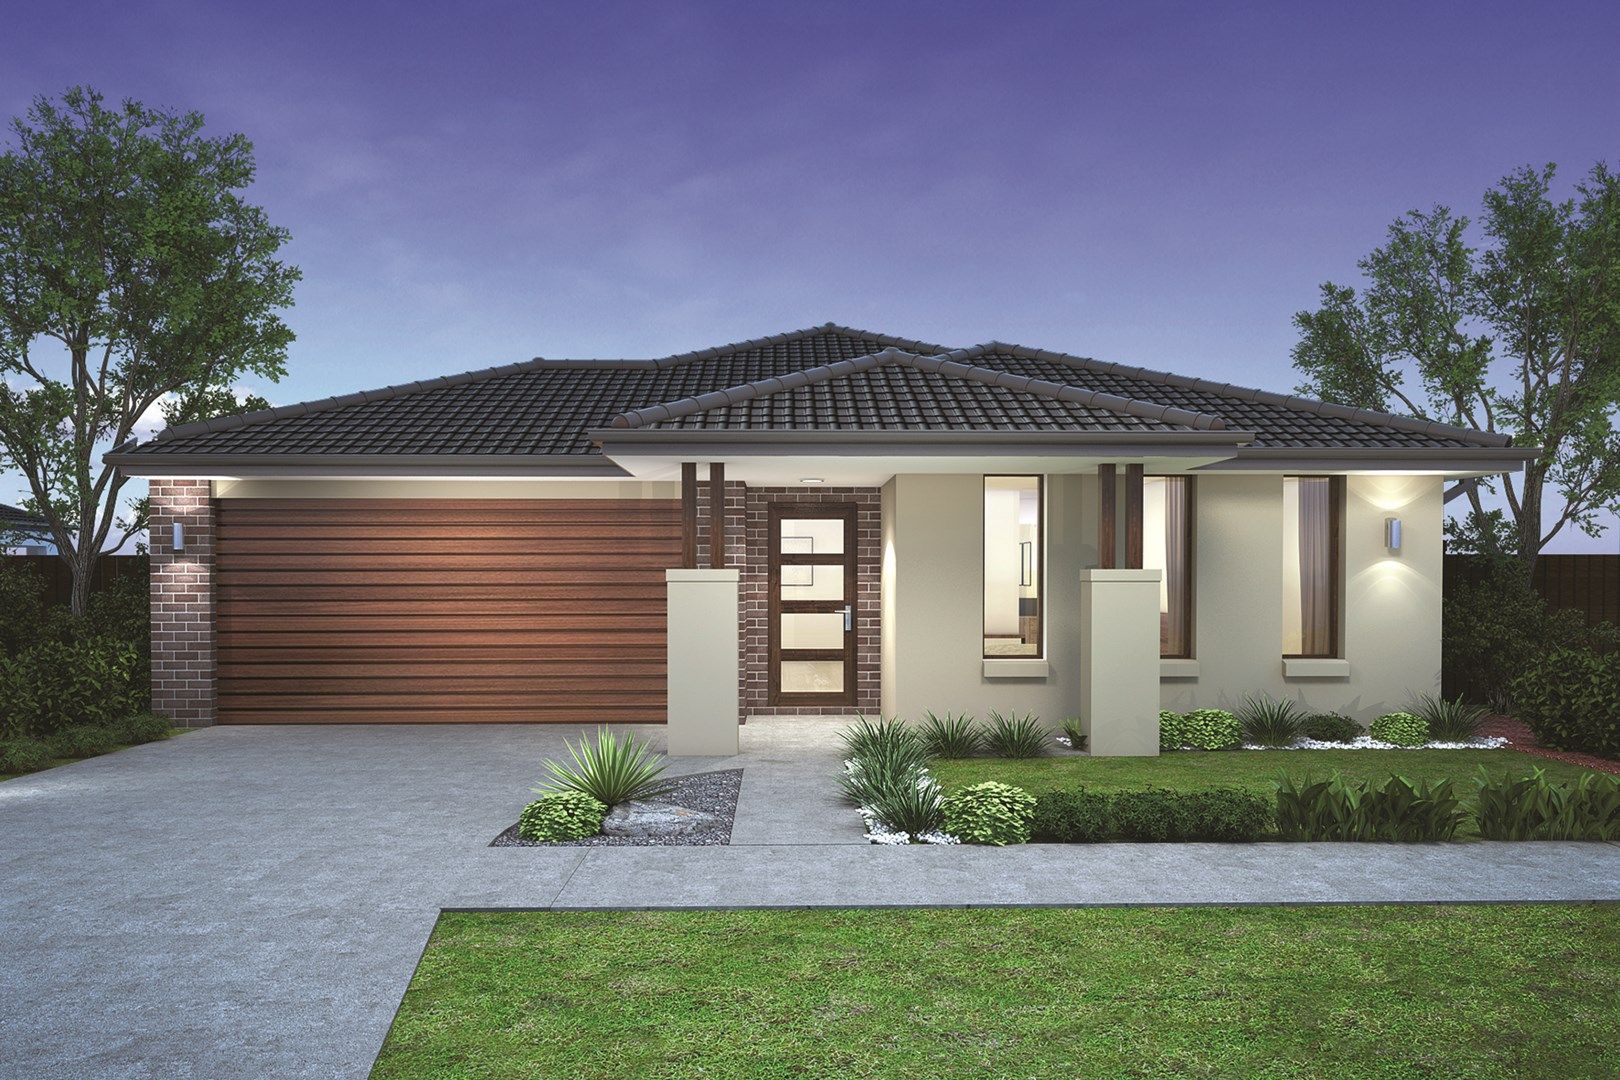 4 bedrooms New House & Land in LOT 703 Taylors Run Estate FRASER RISE VIC, 3336